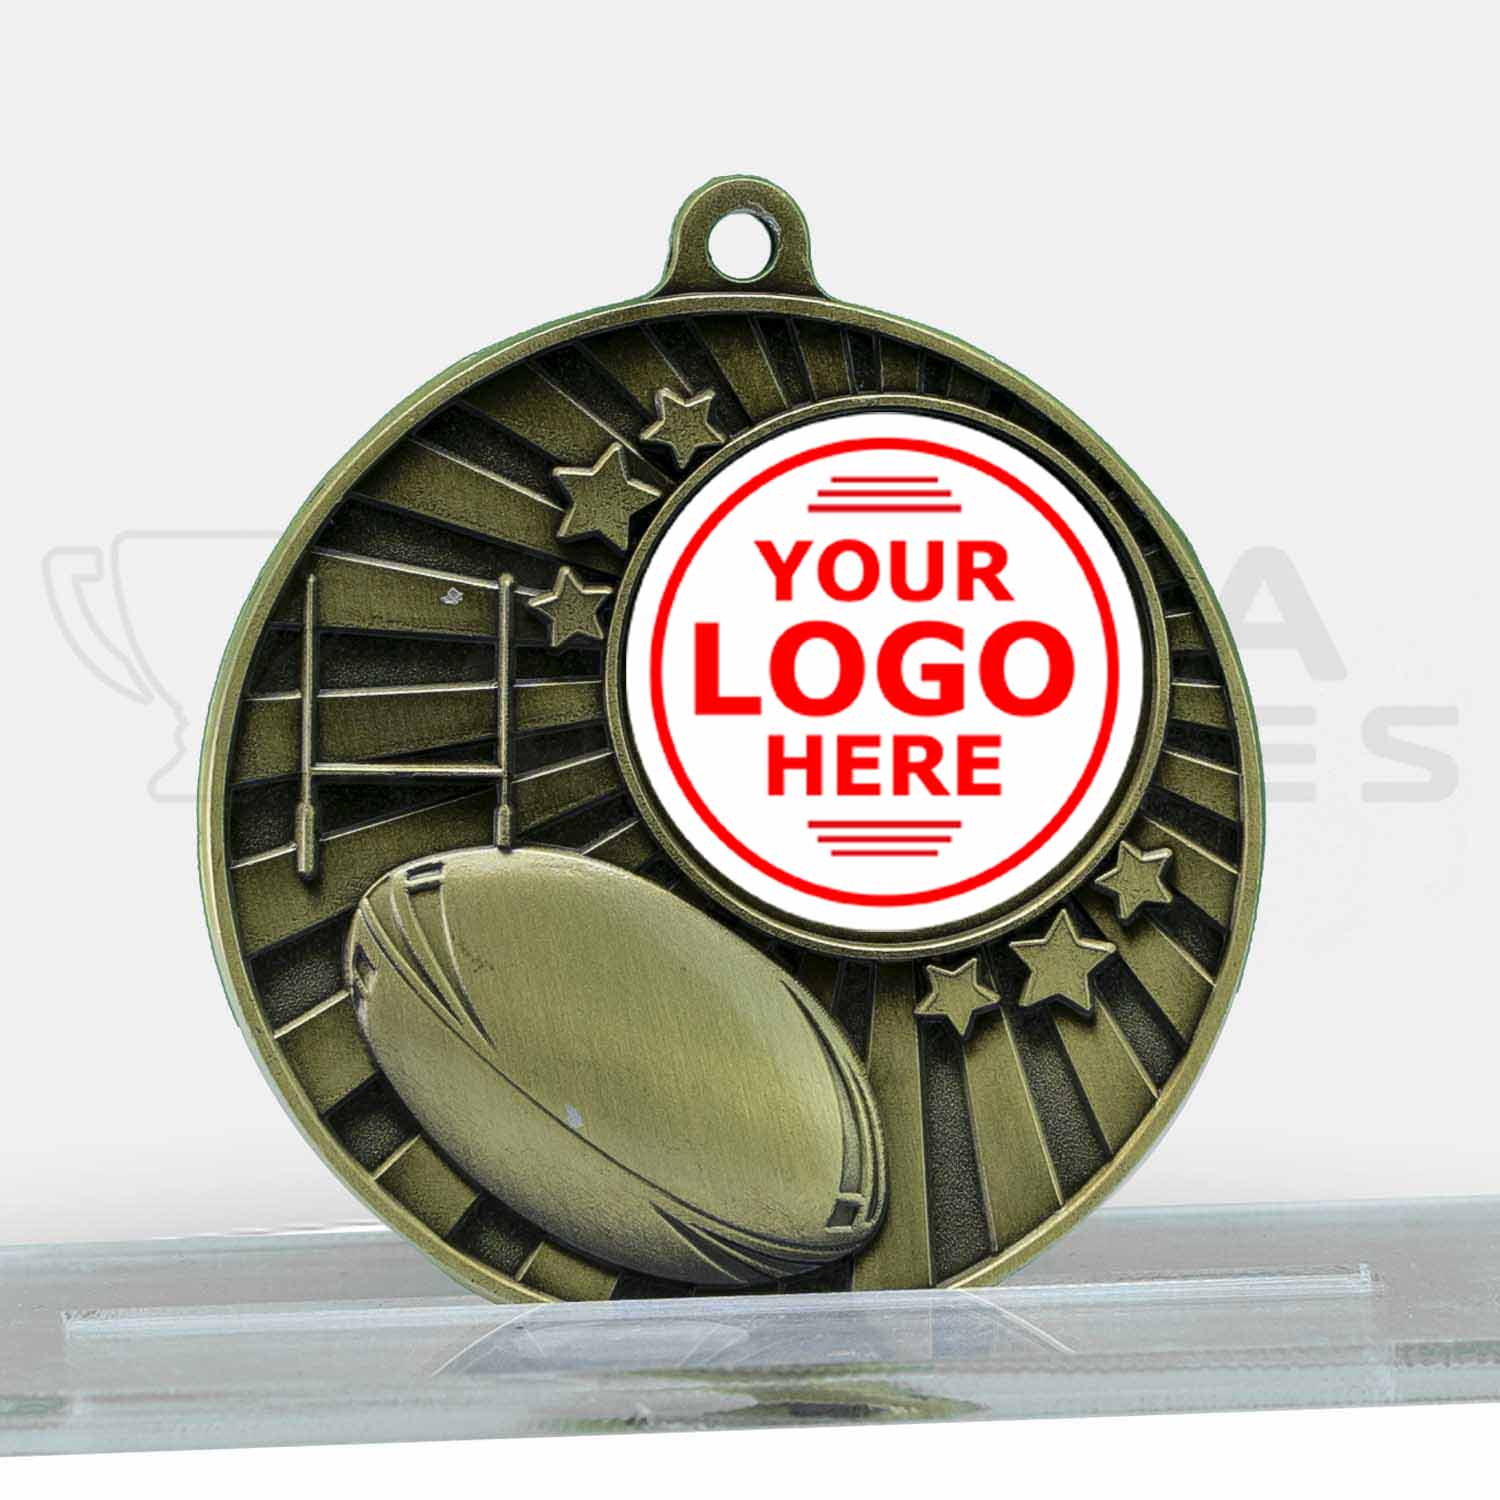 impact-medal-rugby-league-union-gold-mz613g-front-with-logo